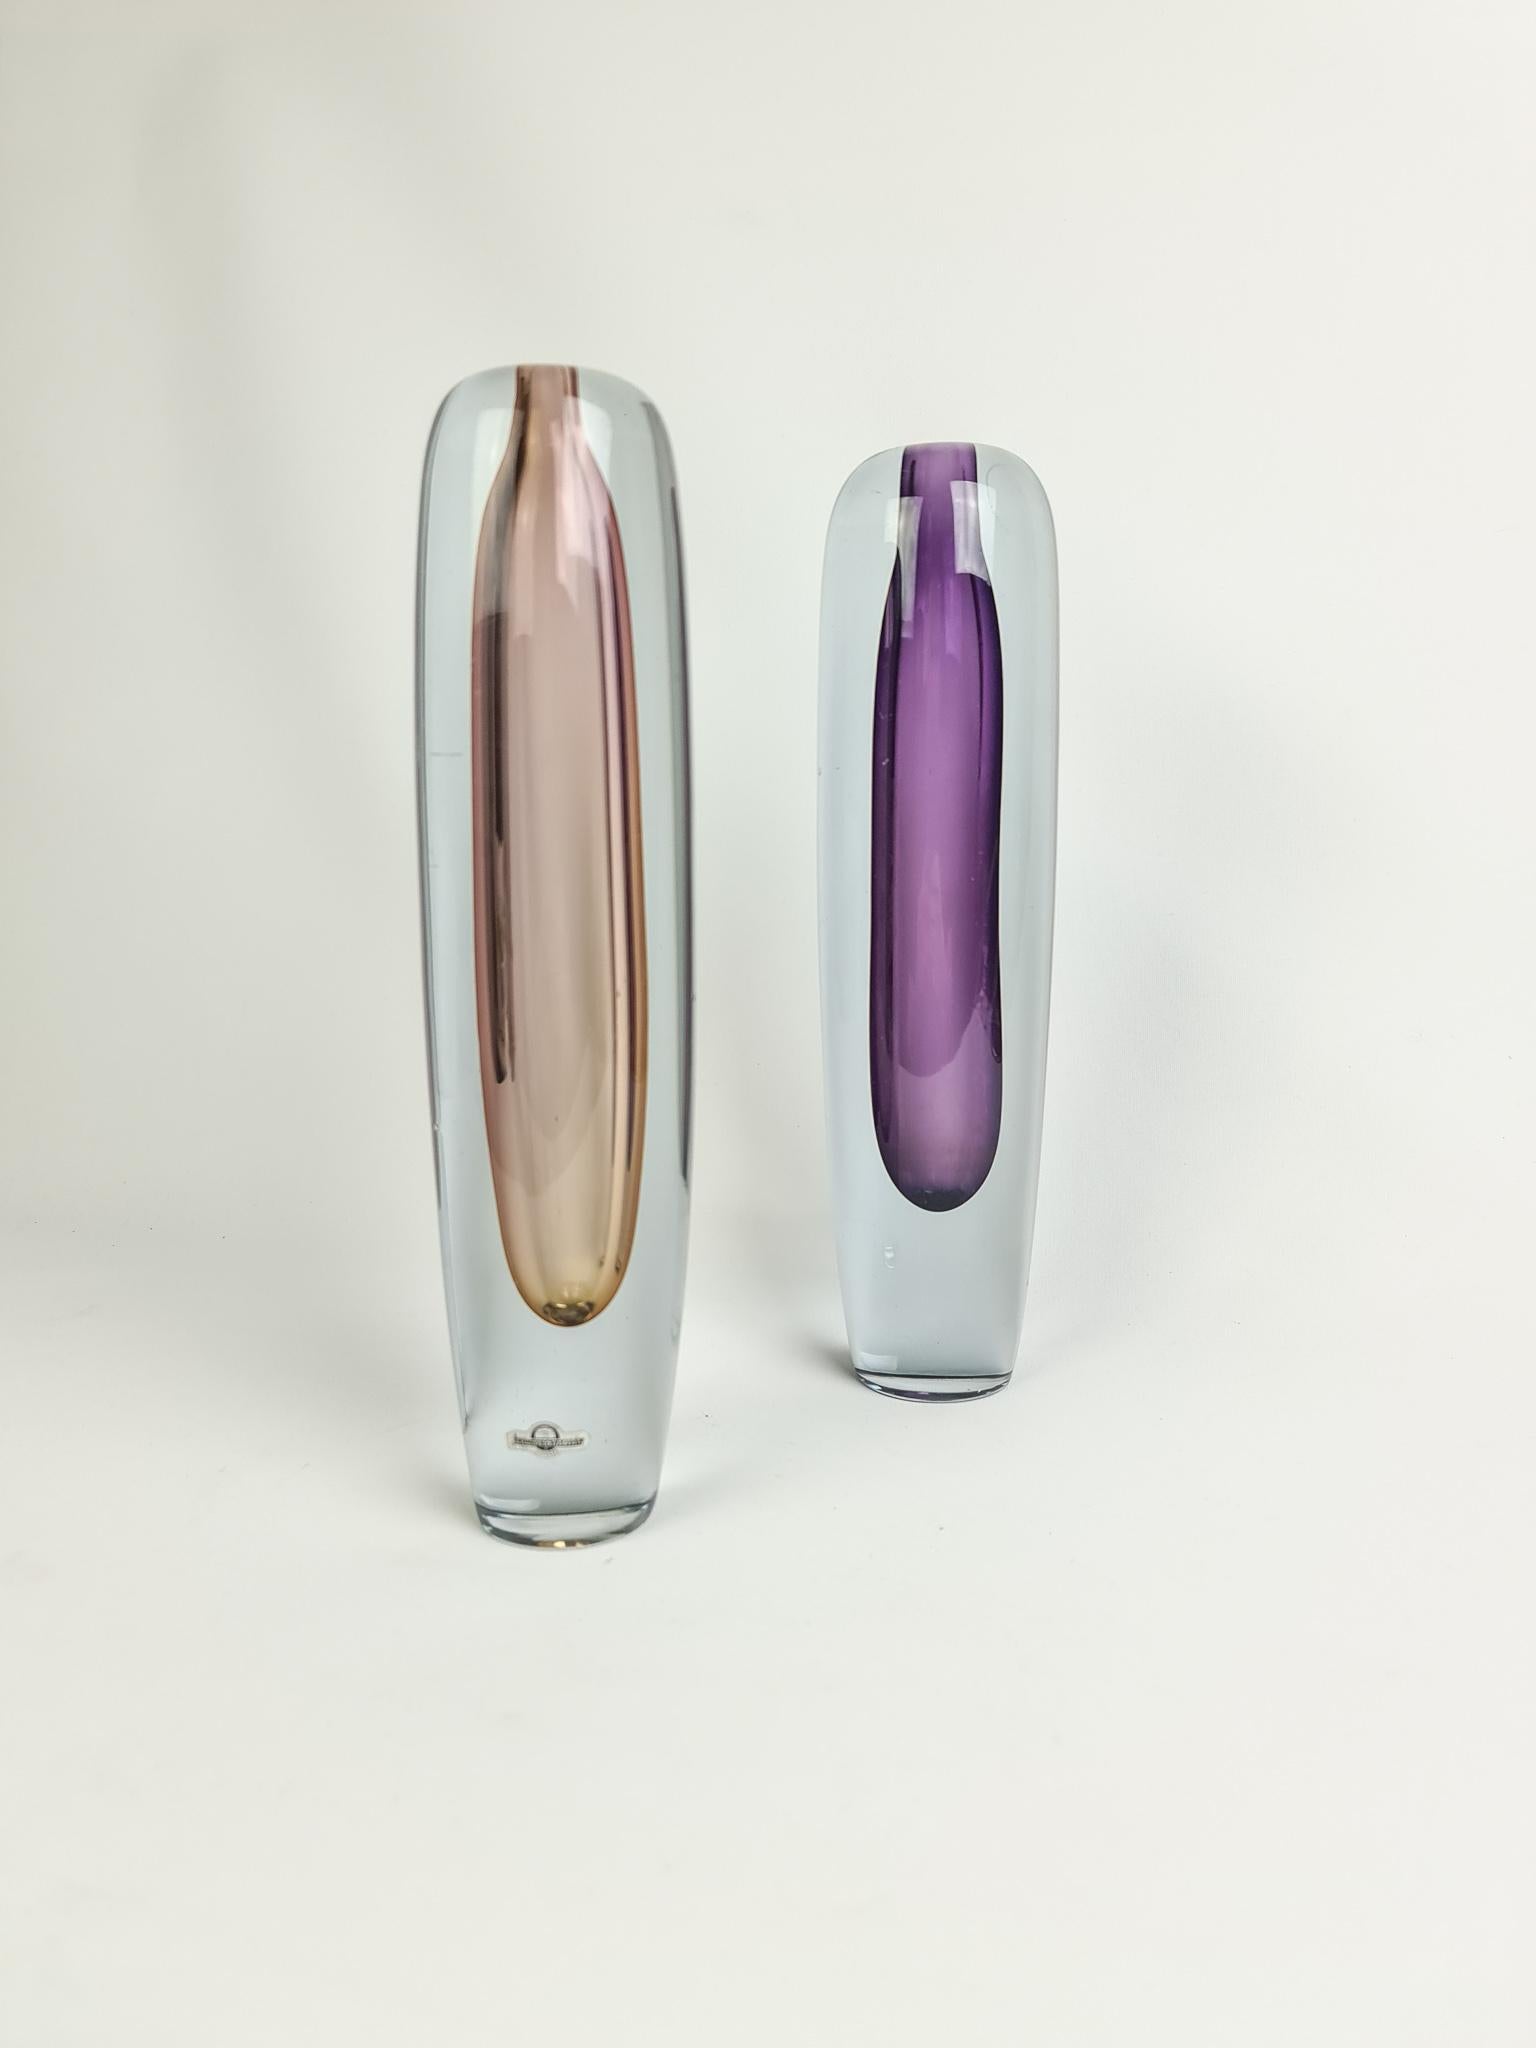 Wonderful tall glass vases designed by famous Gunnar Nylund and produced between 1952-1955 Strömbergshyttan in Sweden.
This set of 2 tall vases are wonderful sculptured and with its colored inside it gives a beautiful light when struck by a light.